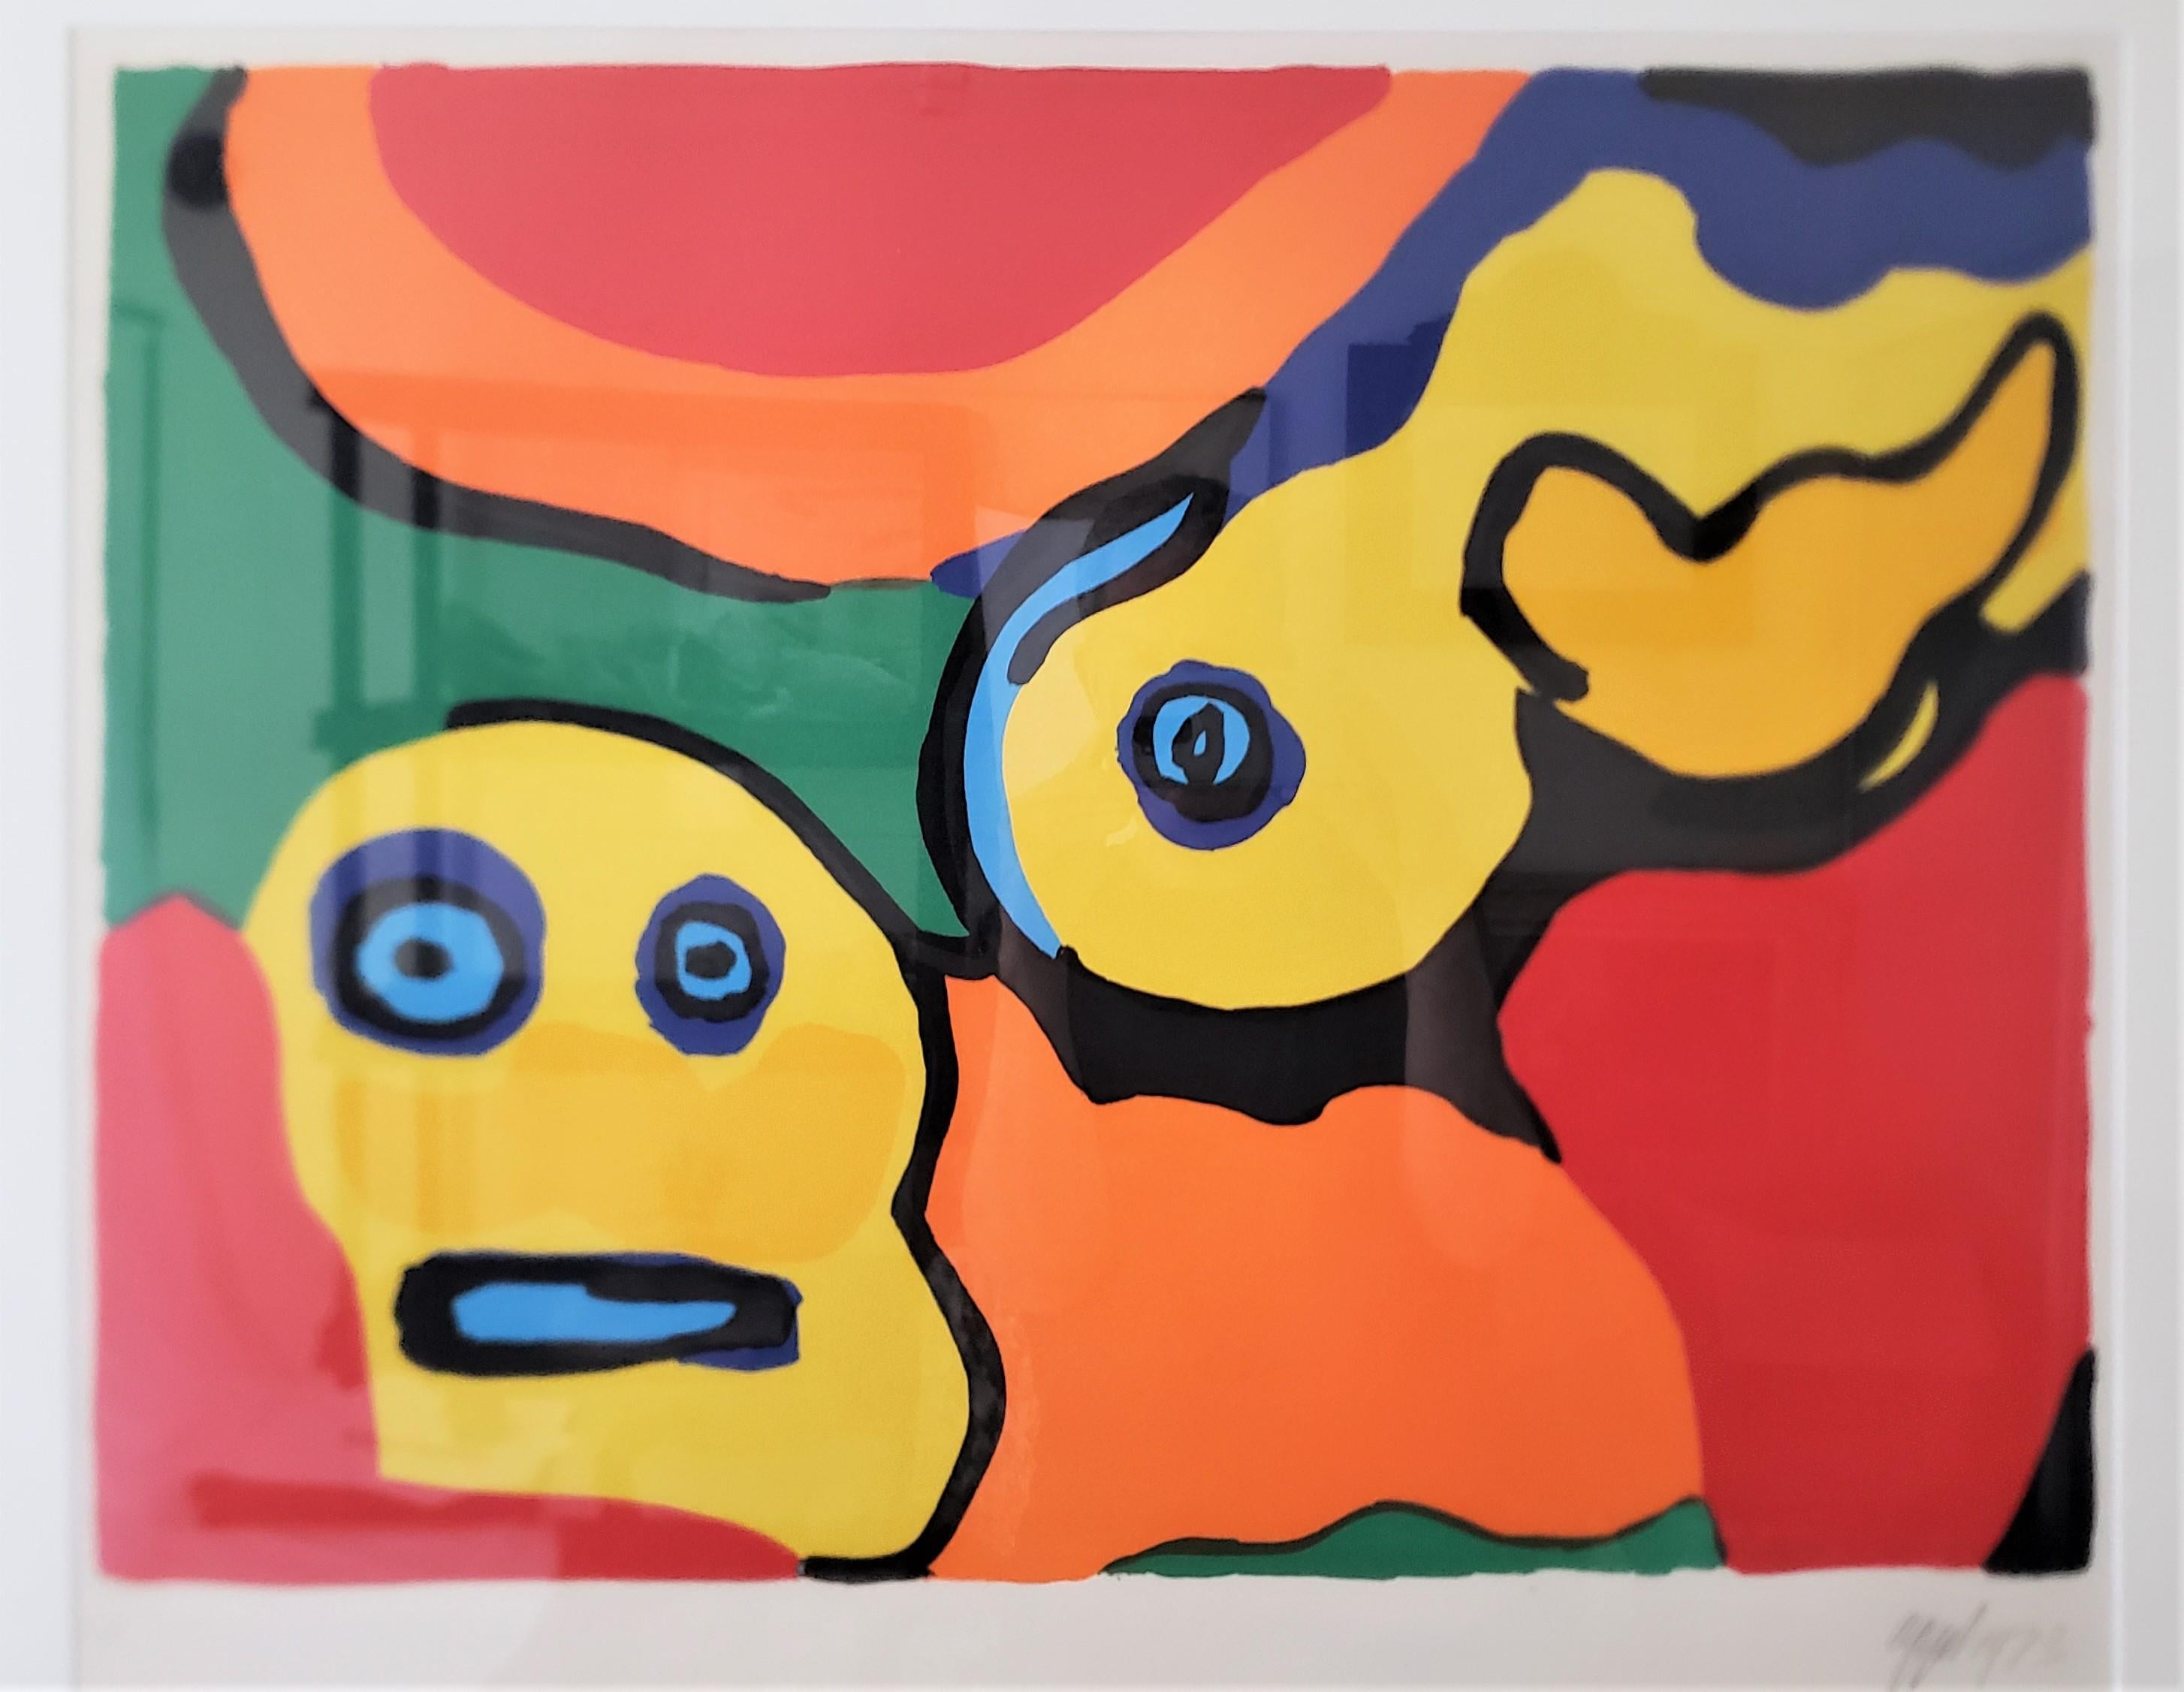 This lithograph was done by the well known Karel or Karl Appel of the Netherlands in 1973 in his Modernist style. The print is done in vivid colors and is pencil marked 